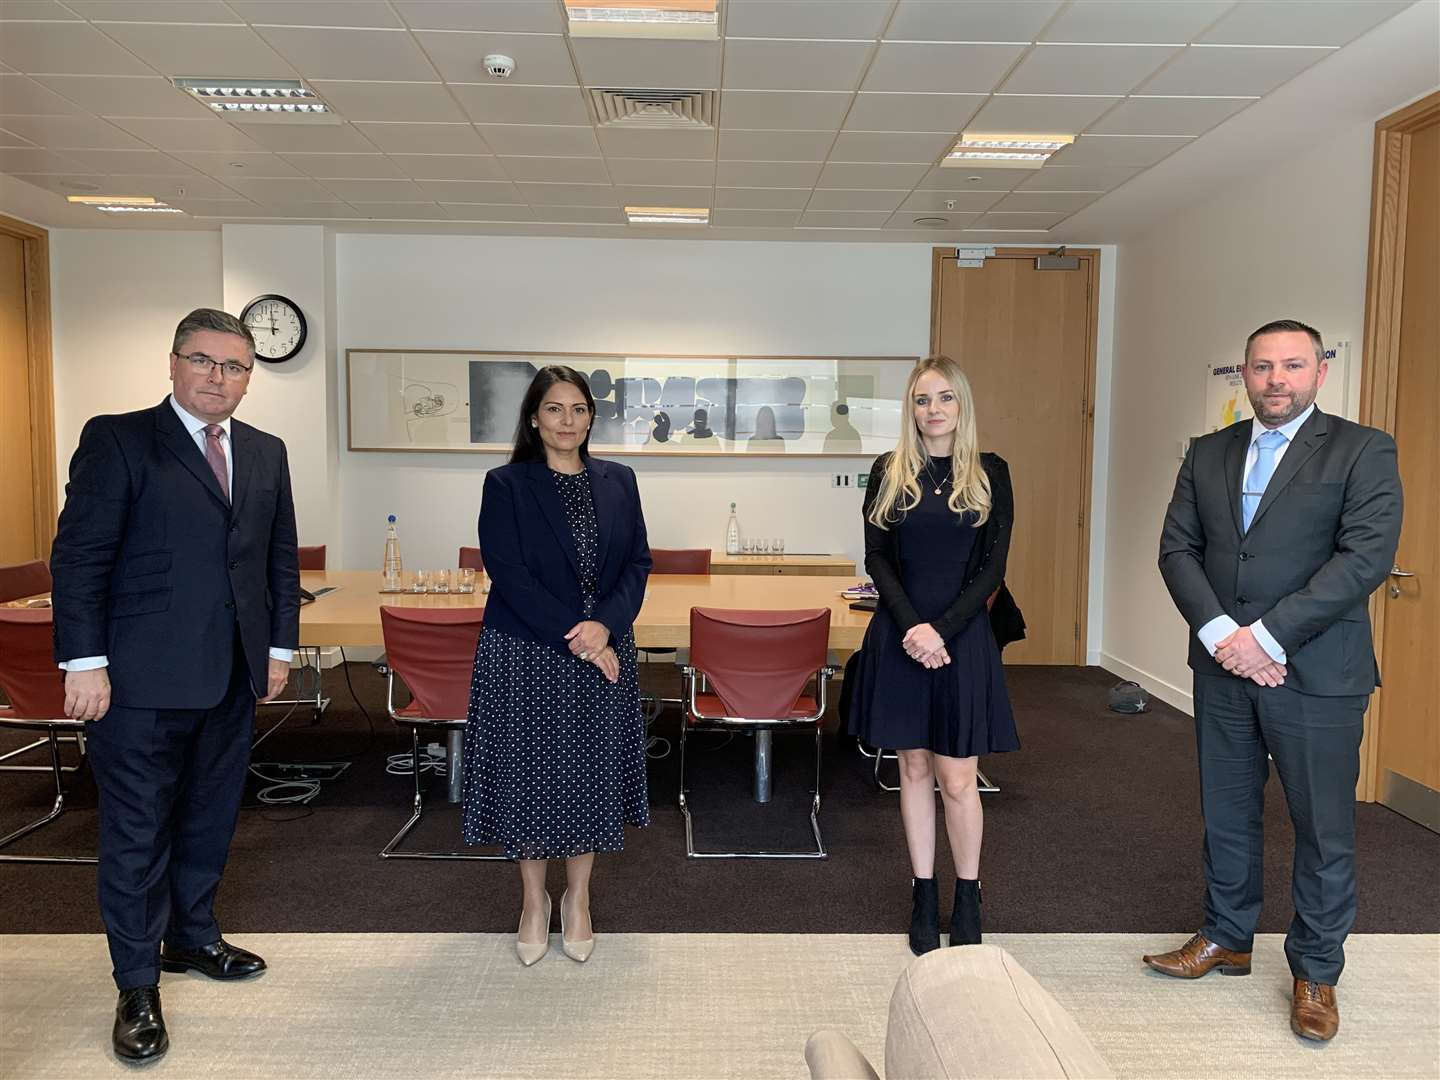 Lissie Harper, the widow of Pc Andrew Harper, alongside Justice Secretary Robert Buckland (left), Sgt Andy Fiddler and Home Secretary Priti Patel during a meeting at the Home Office earlier this year (Martis Media/PA)